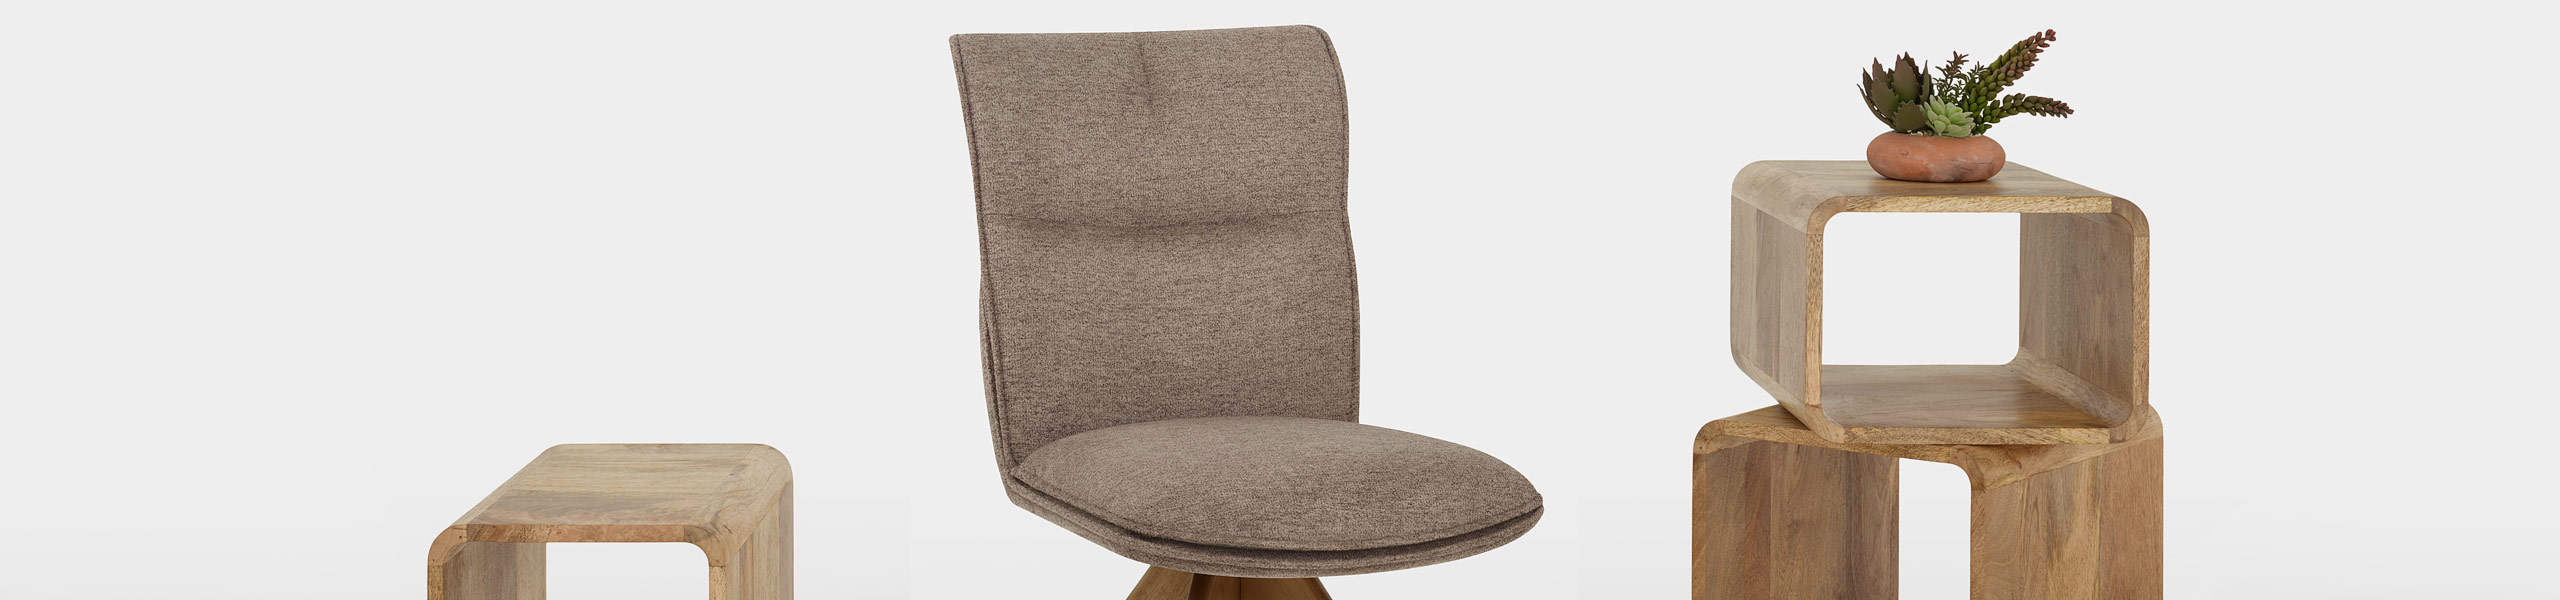 Cody Wooden Dining Chair Brown Fabric Video Banner